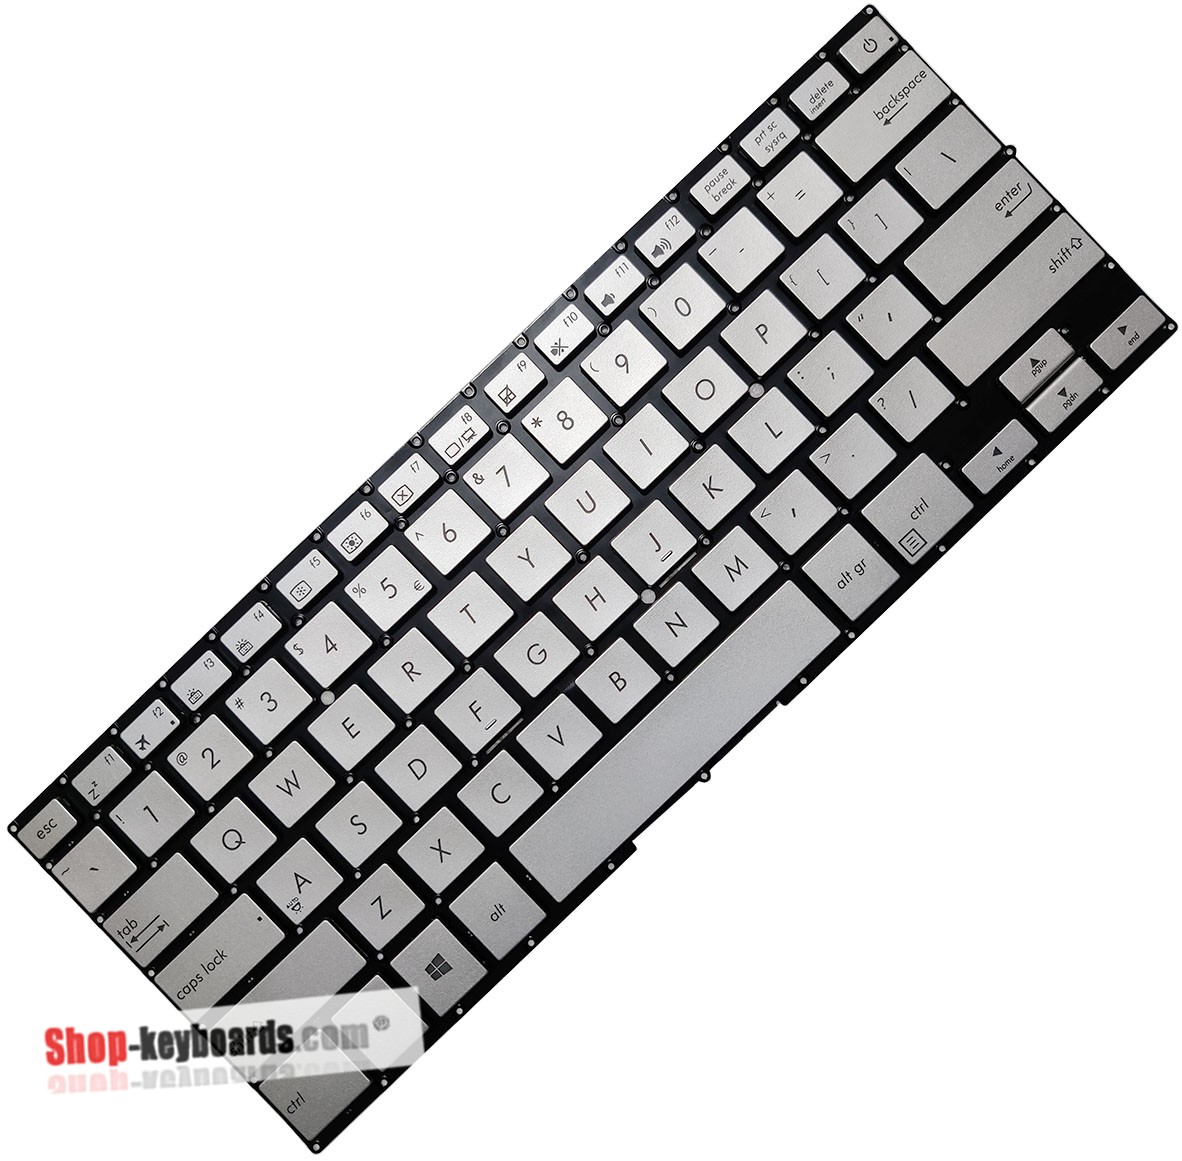 Asus 0KNB0-D620US00 Keyboard replacement